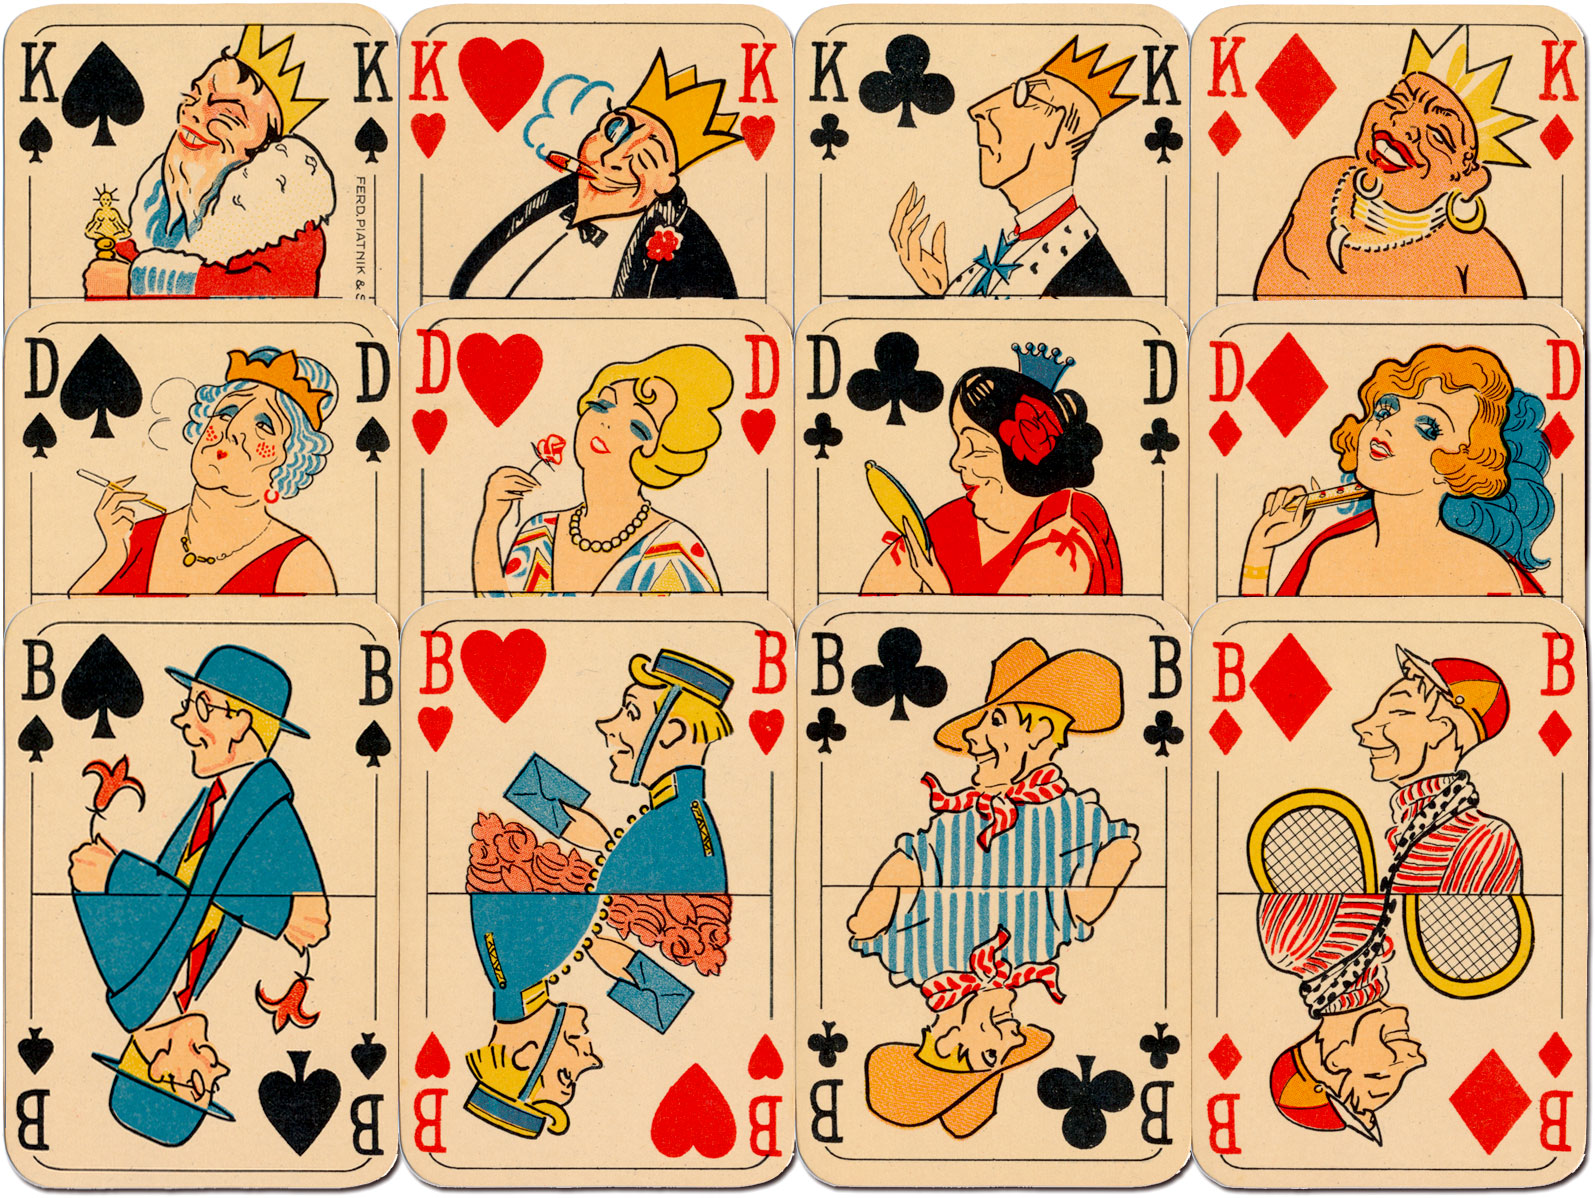 Piatnik's “Rummy No.210” depicts period caricatures from the 1930s